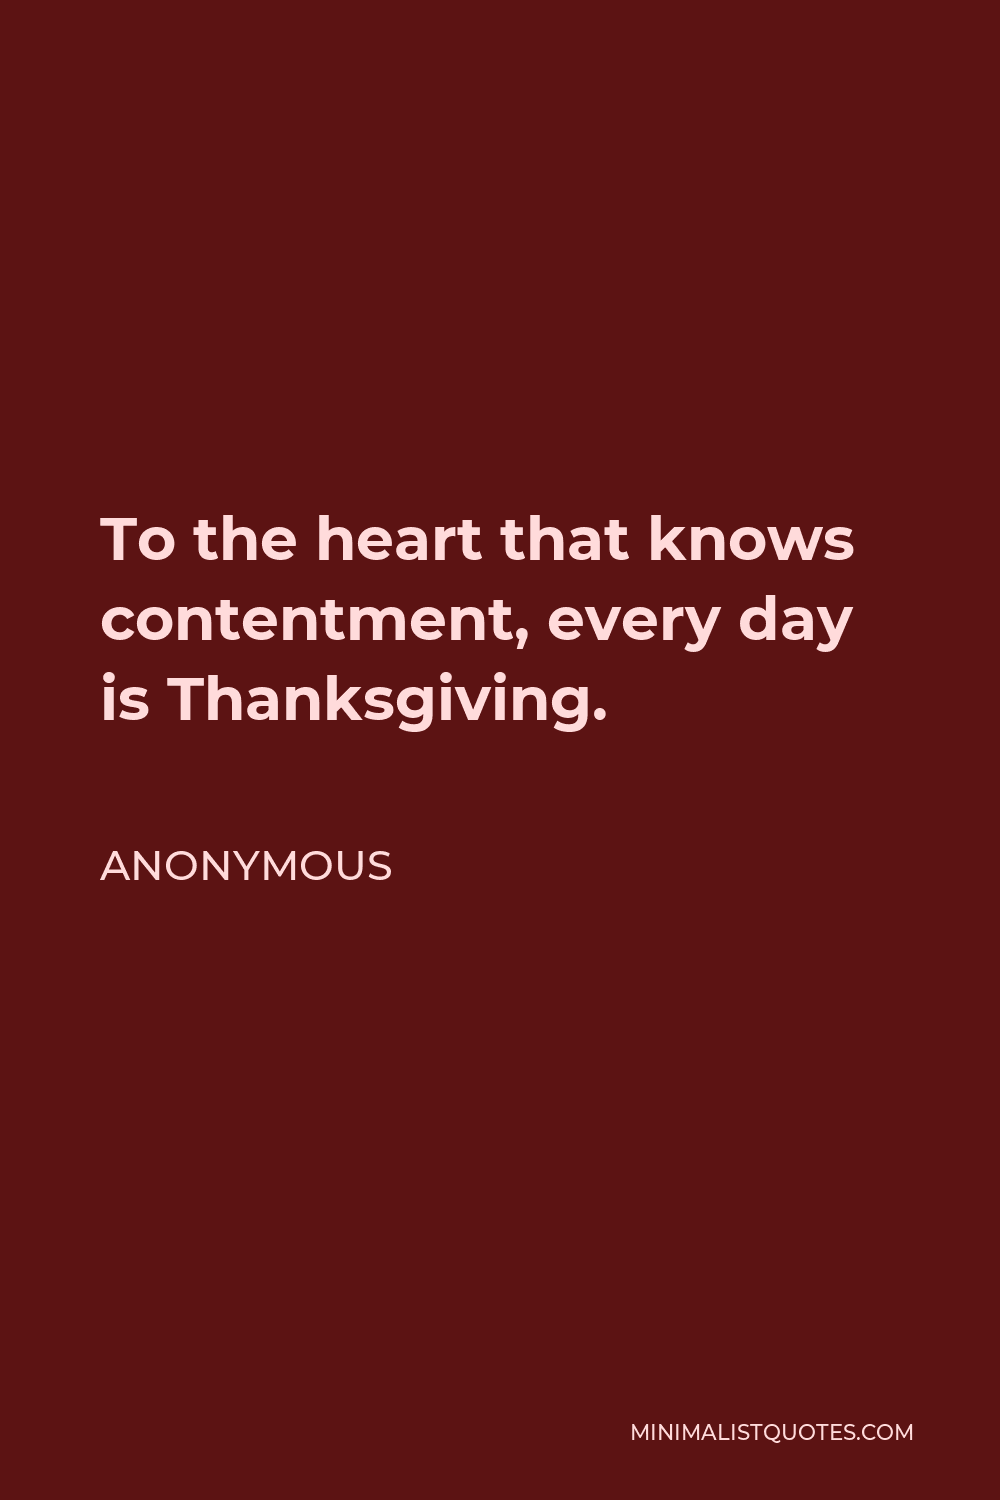 Anonymous Quote - To the heart that knows contentment, every day is Thanksgiving.